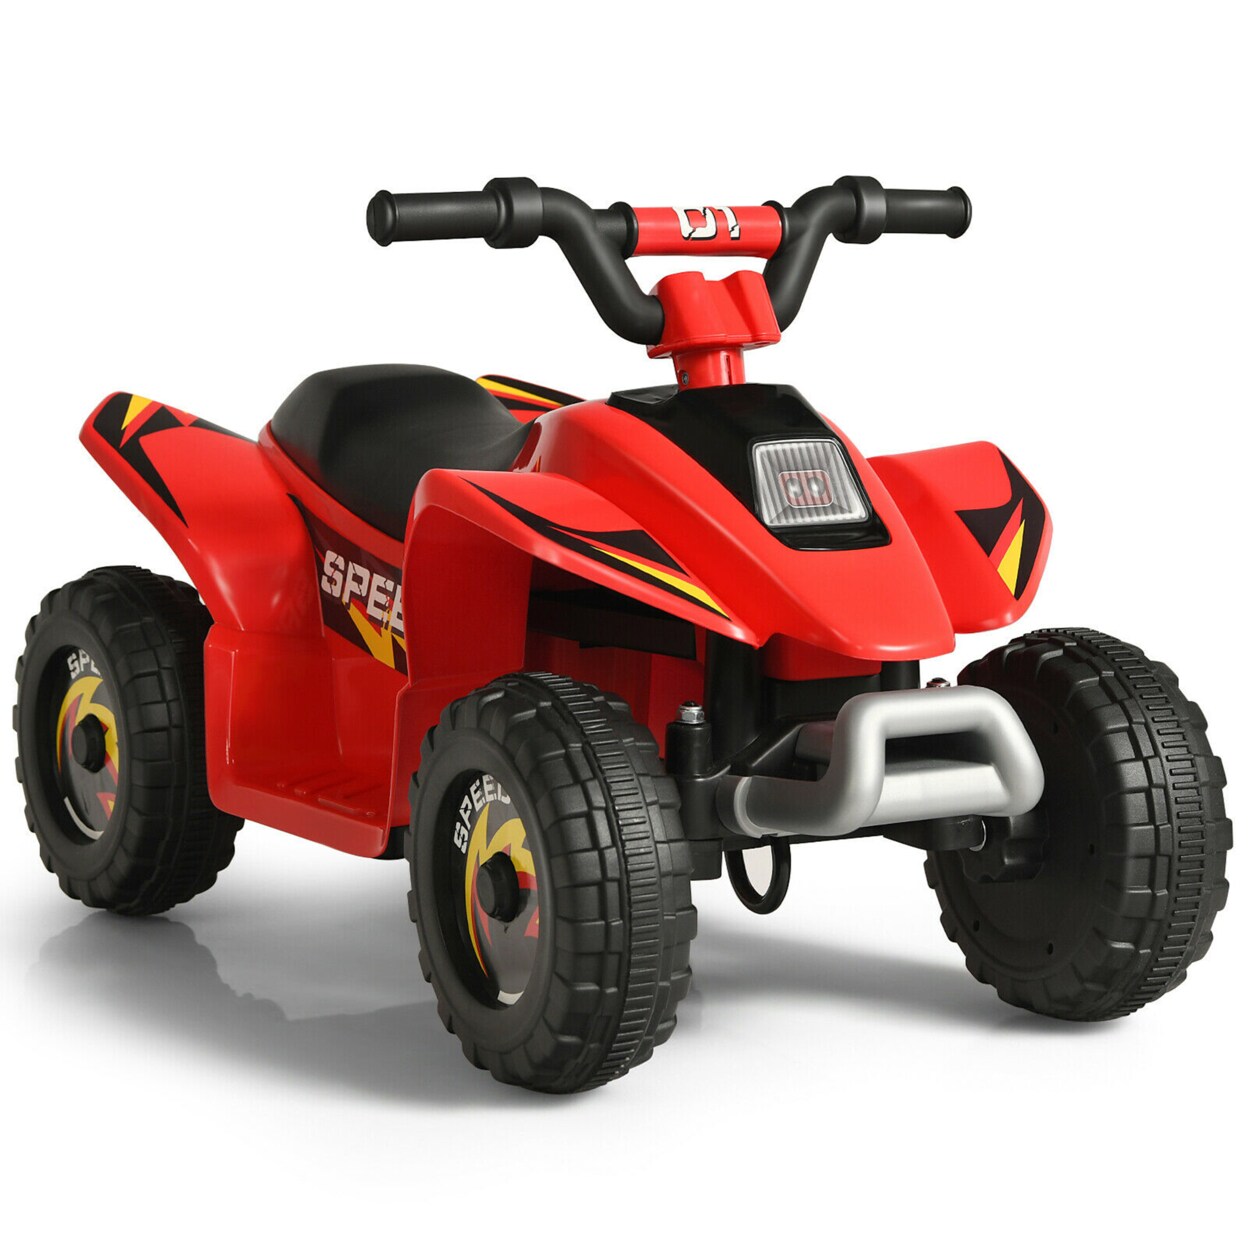 Gymax 6V Kids Electric Quad ATV 4 Wheels Ride On Toy Toddlers Forward and Reverse